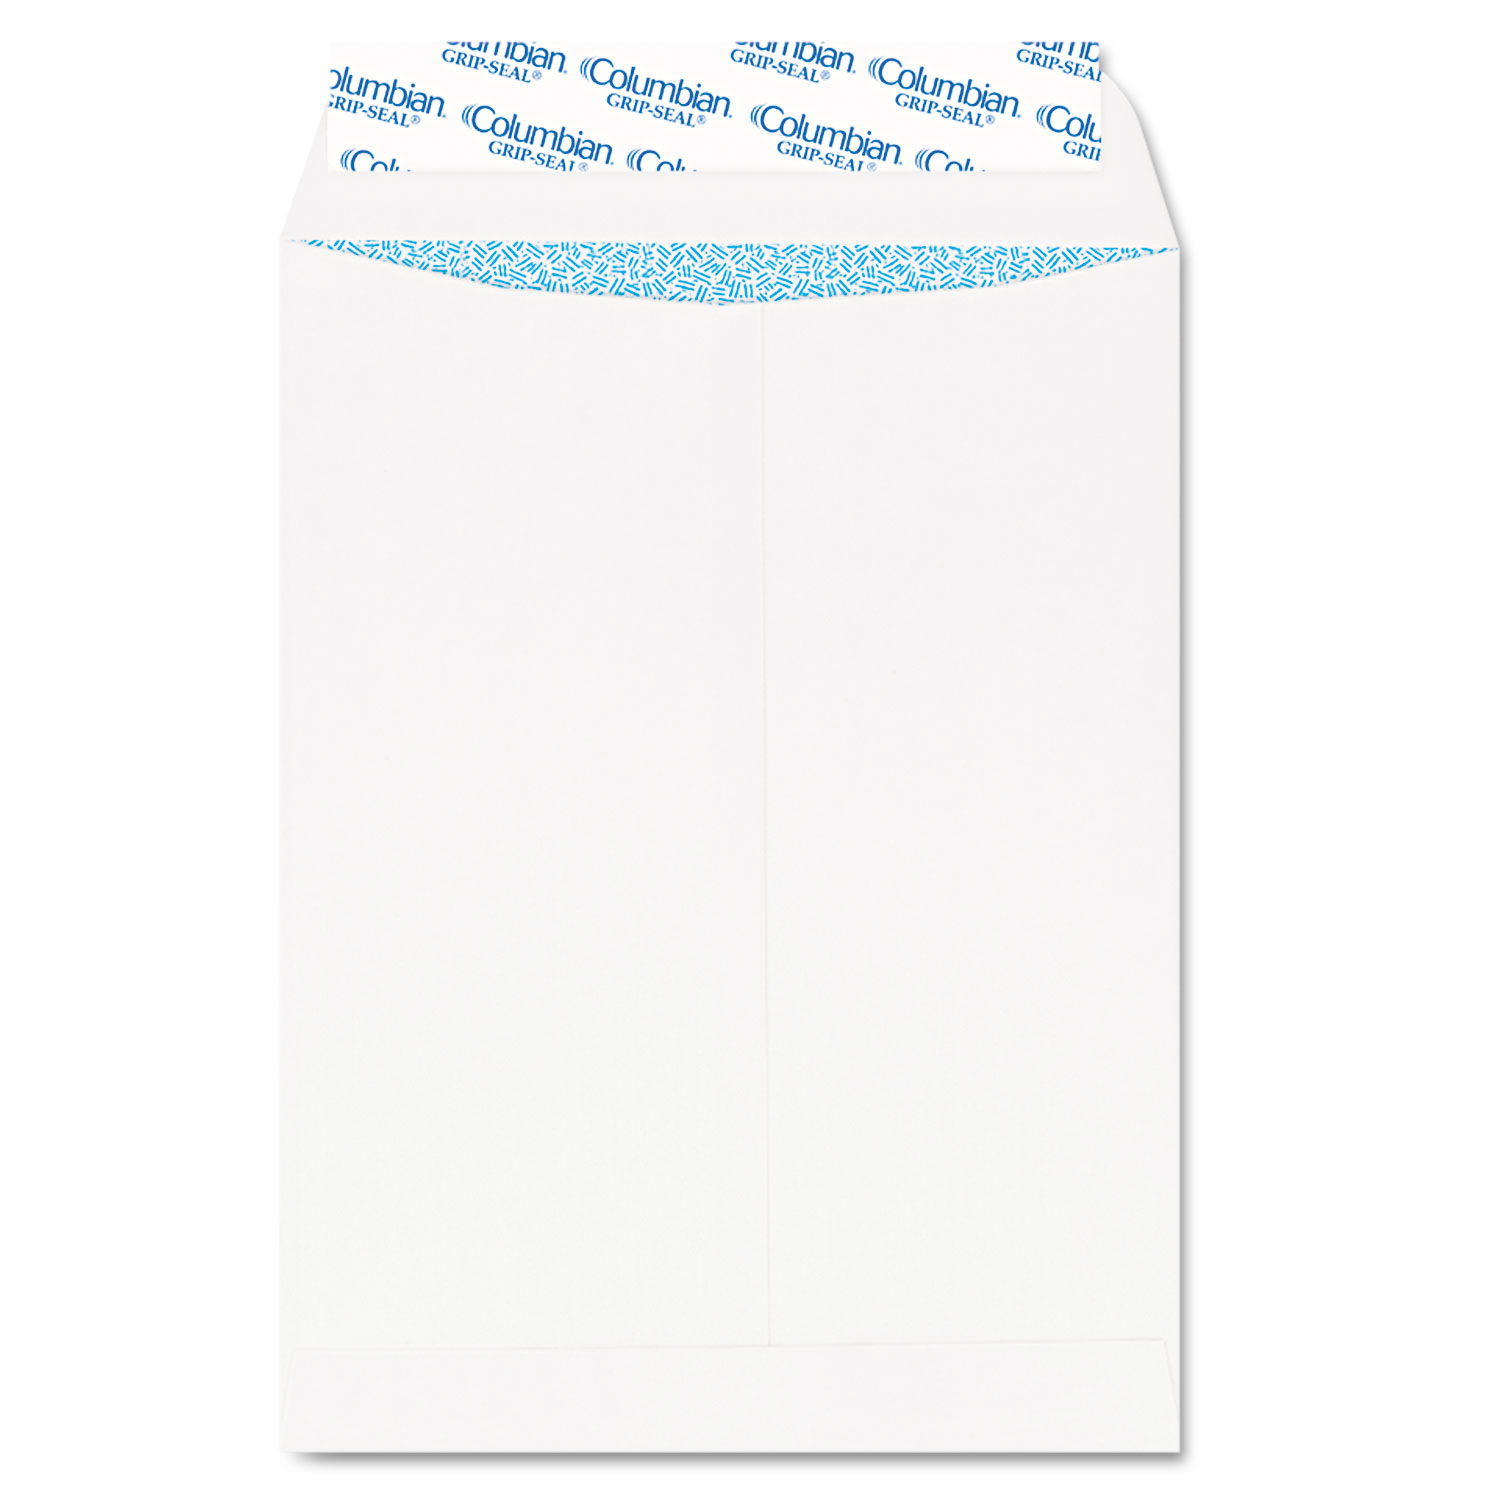  Columbian COLO929 Grip-Seal Security Tinted All-Purpose Catalog Envelope, #13 1/2, Cheese Blade Flap, 10 x 13, White, 100/Box (QUACO929) 